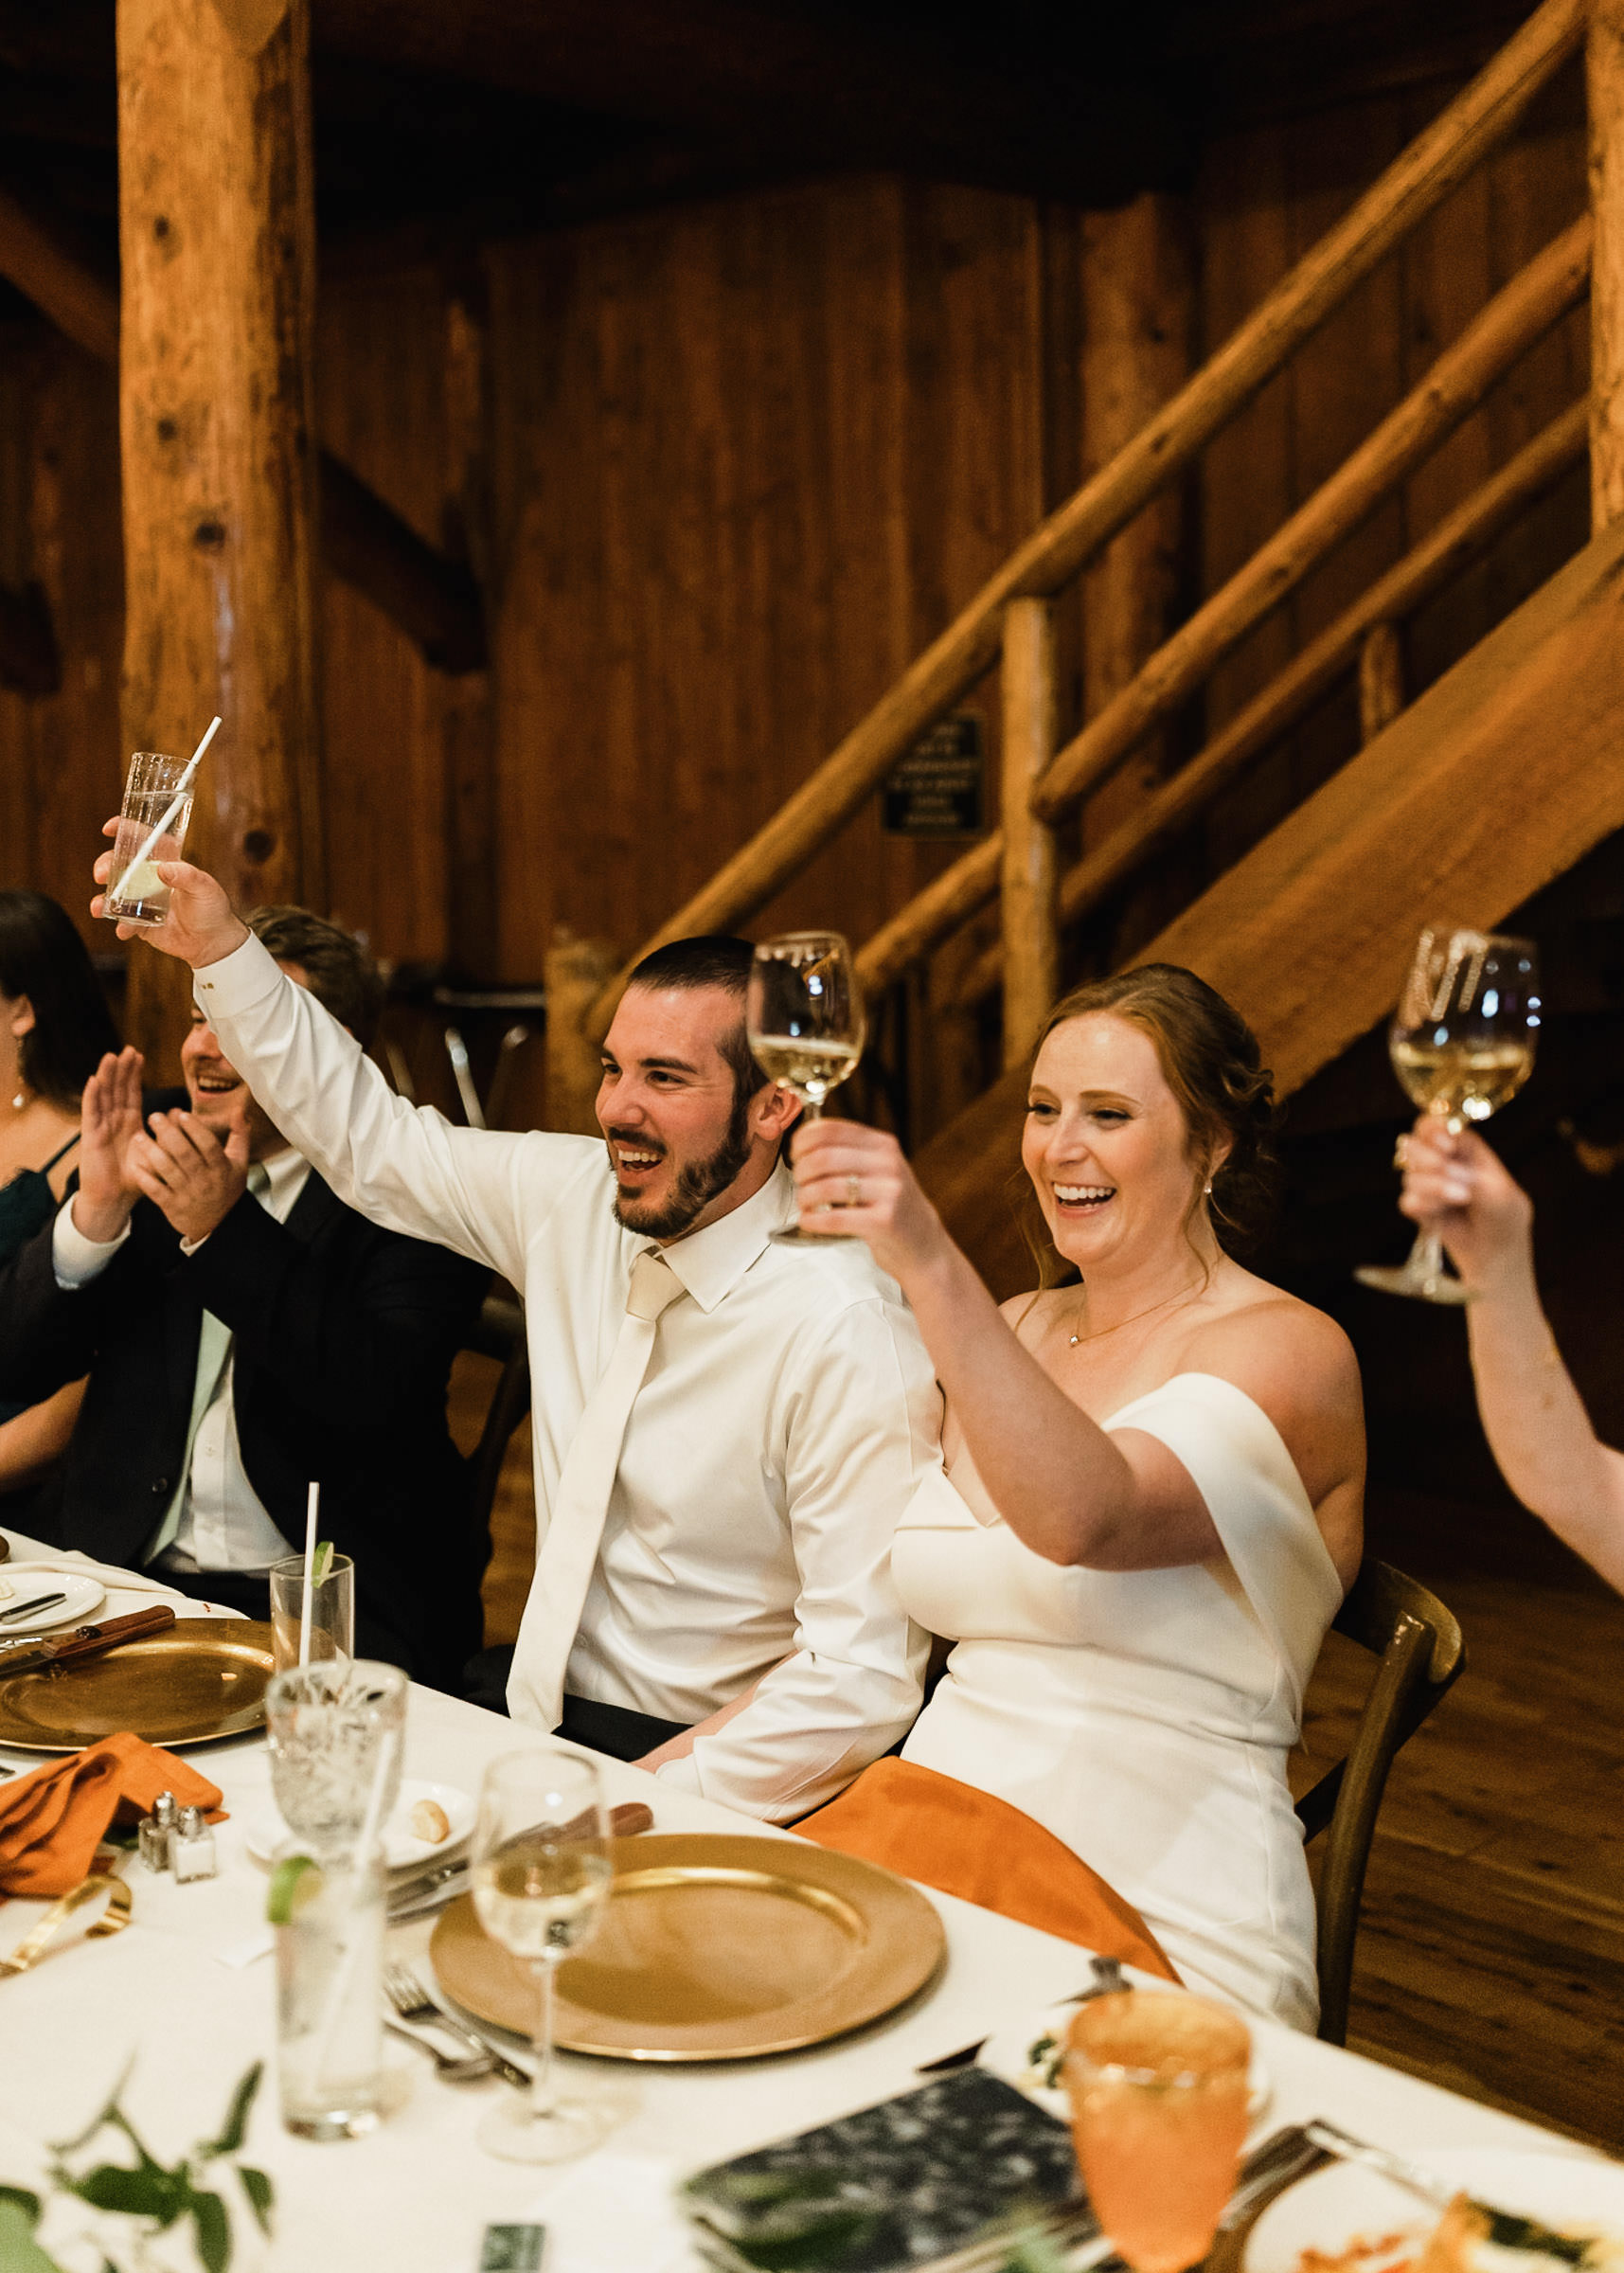 Bride and groom raise their glasses during toasts